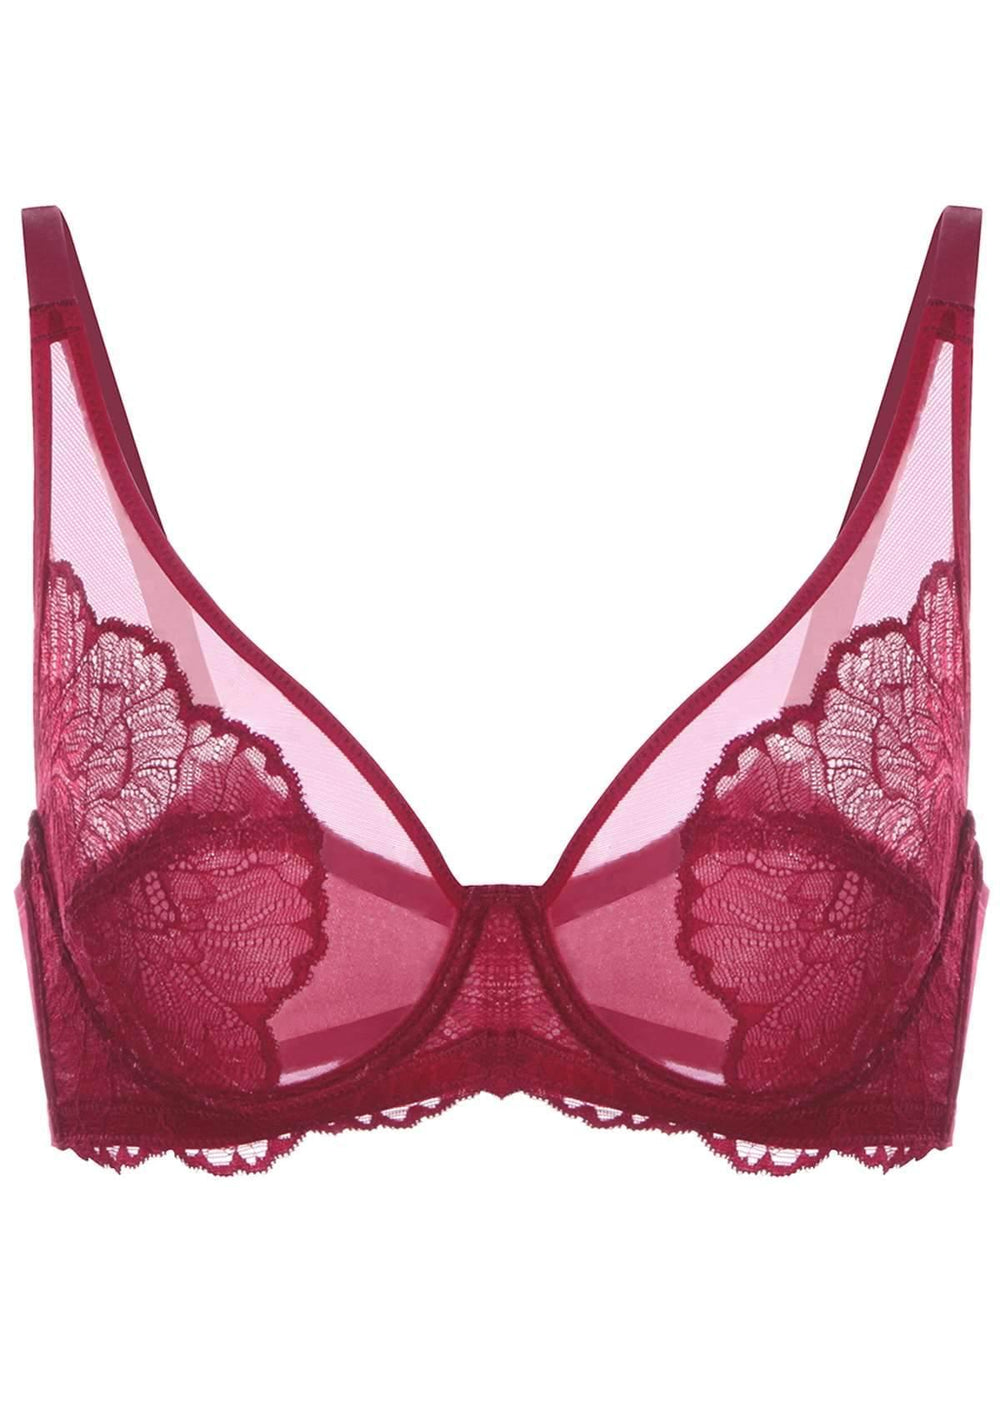 Rainbow Shops Womens Paisley Lace Balconette Bra, Converts to Strapless,  Red